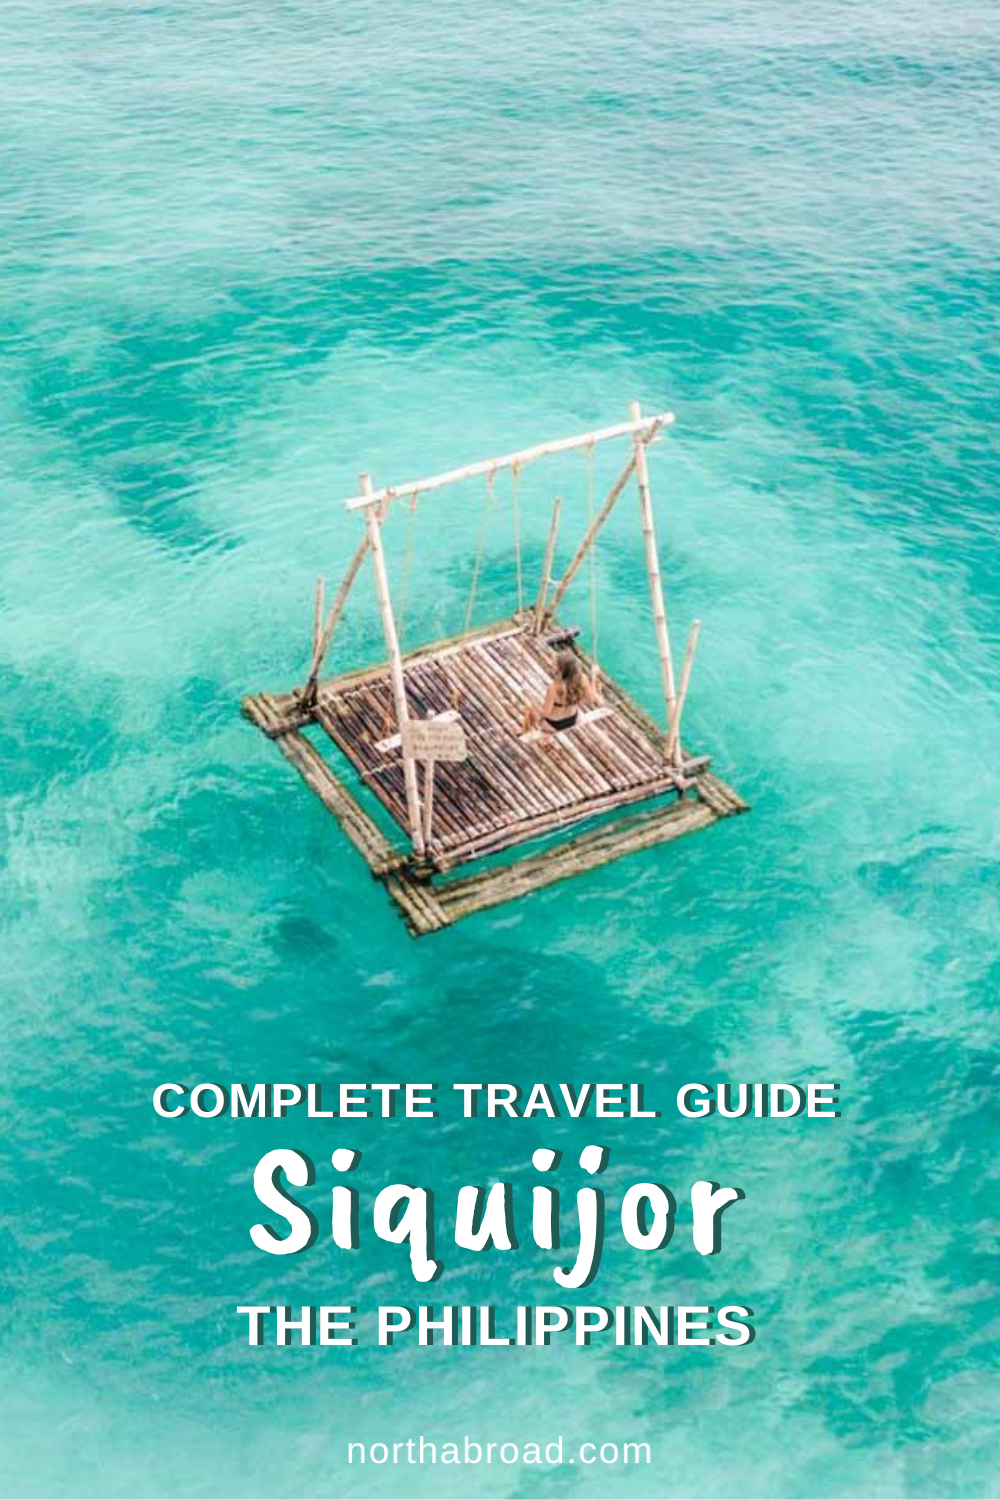 An Extensive Travel Guide to Siquijor: Everything You Need to Know About the Mysterious Island